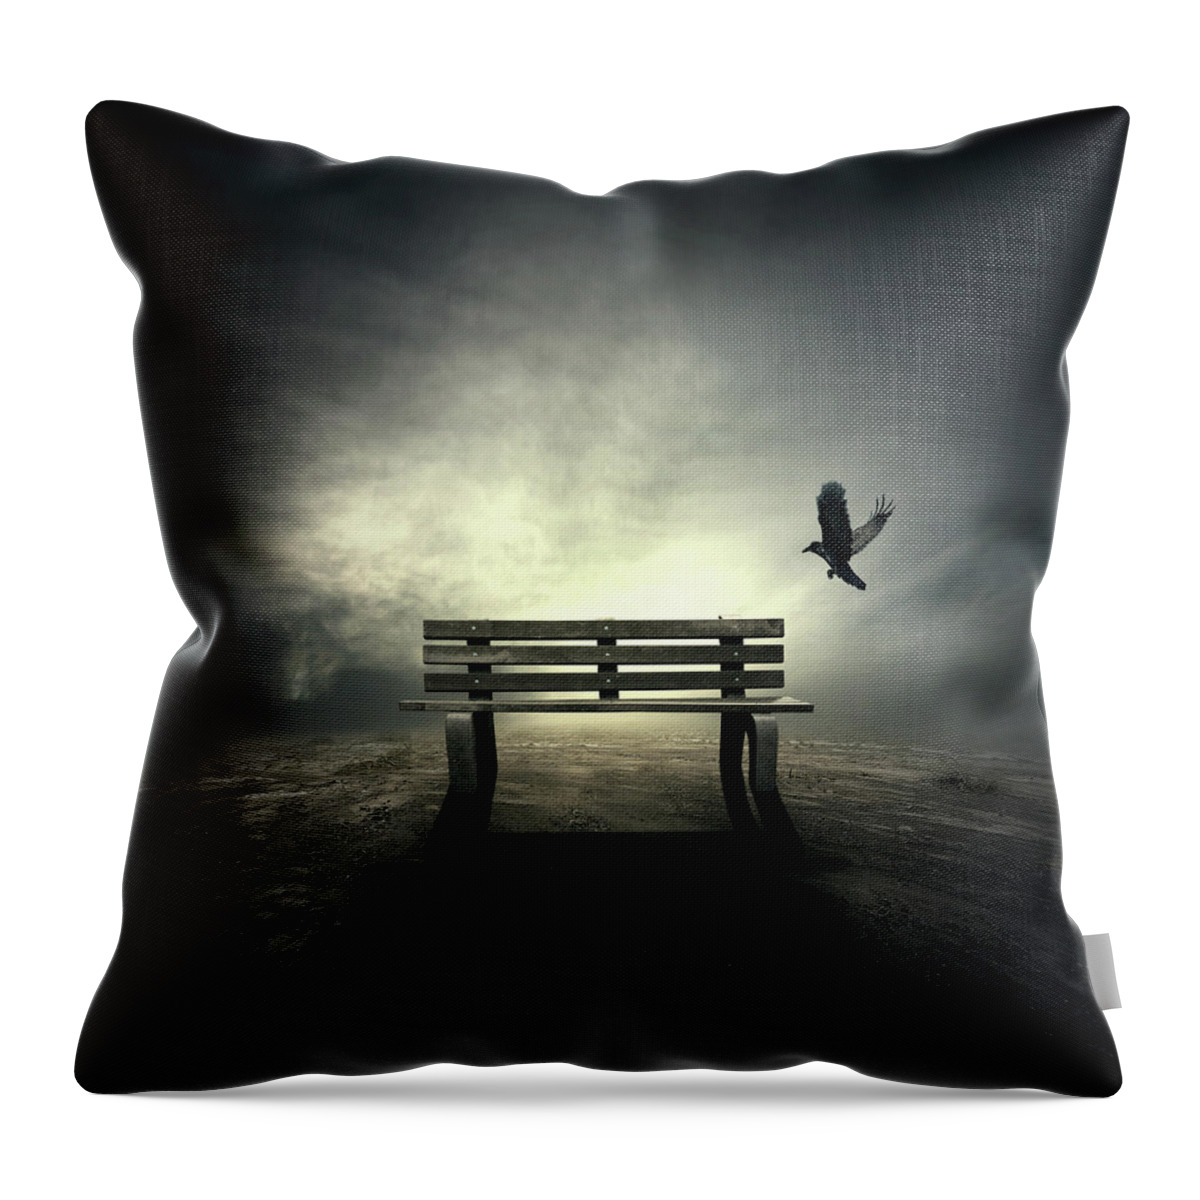 Bench Throw Pillow featuring the digital art Landing by Zoltan Toth